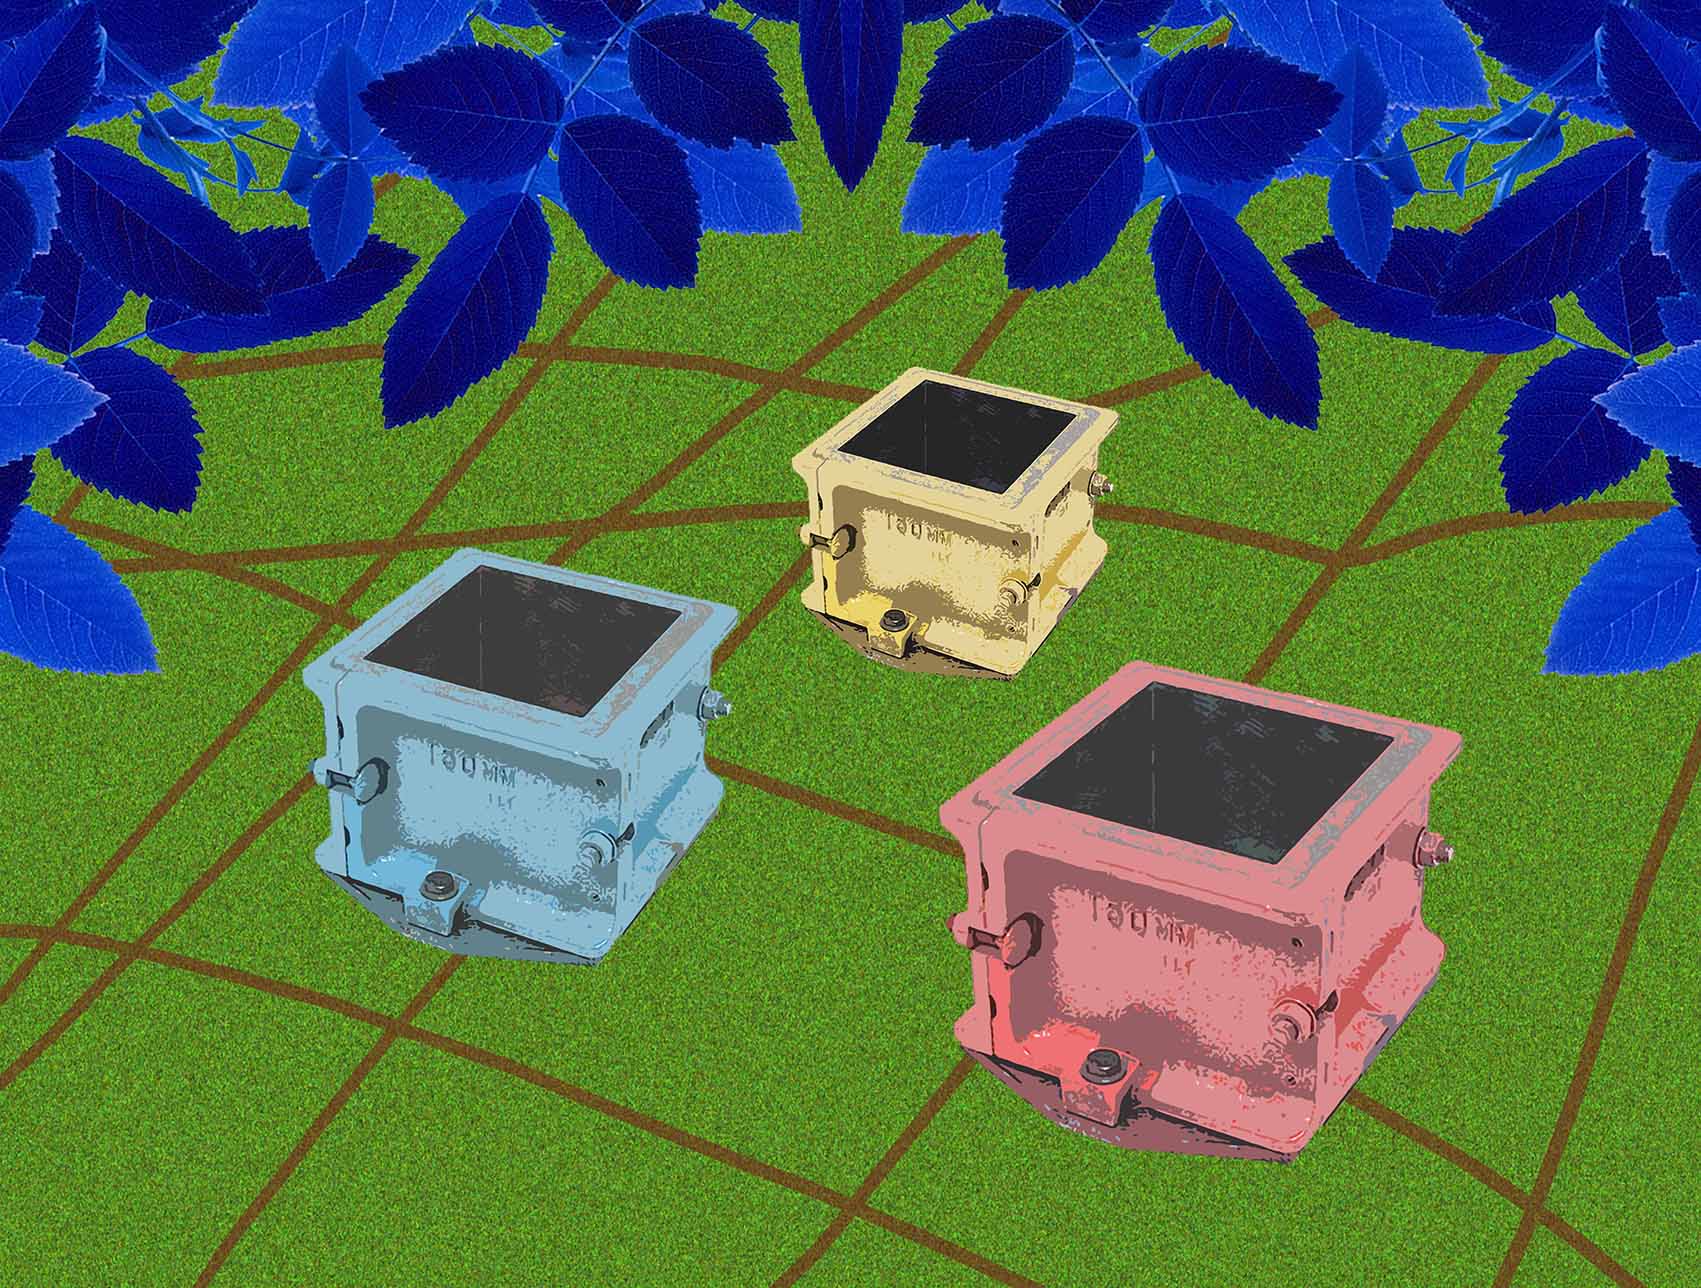 Four coloured, metal moulds (in yellow, light red and light blue), set on a green background, above which are blue leaves